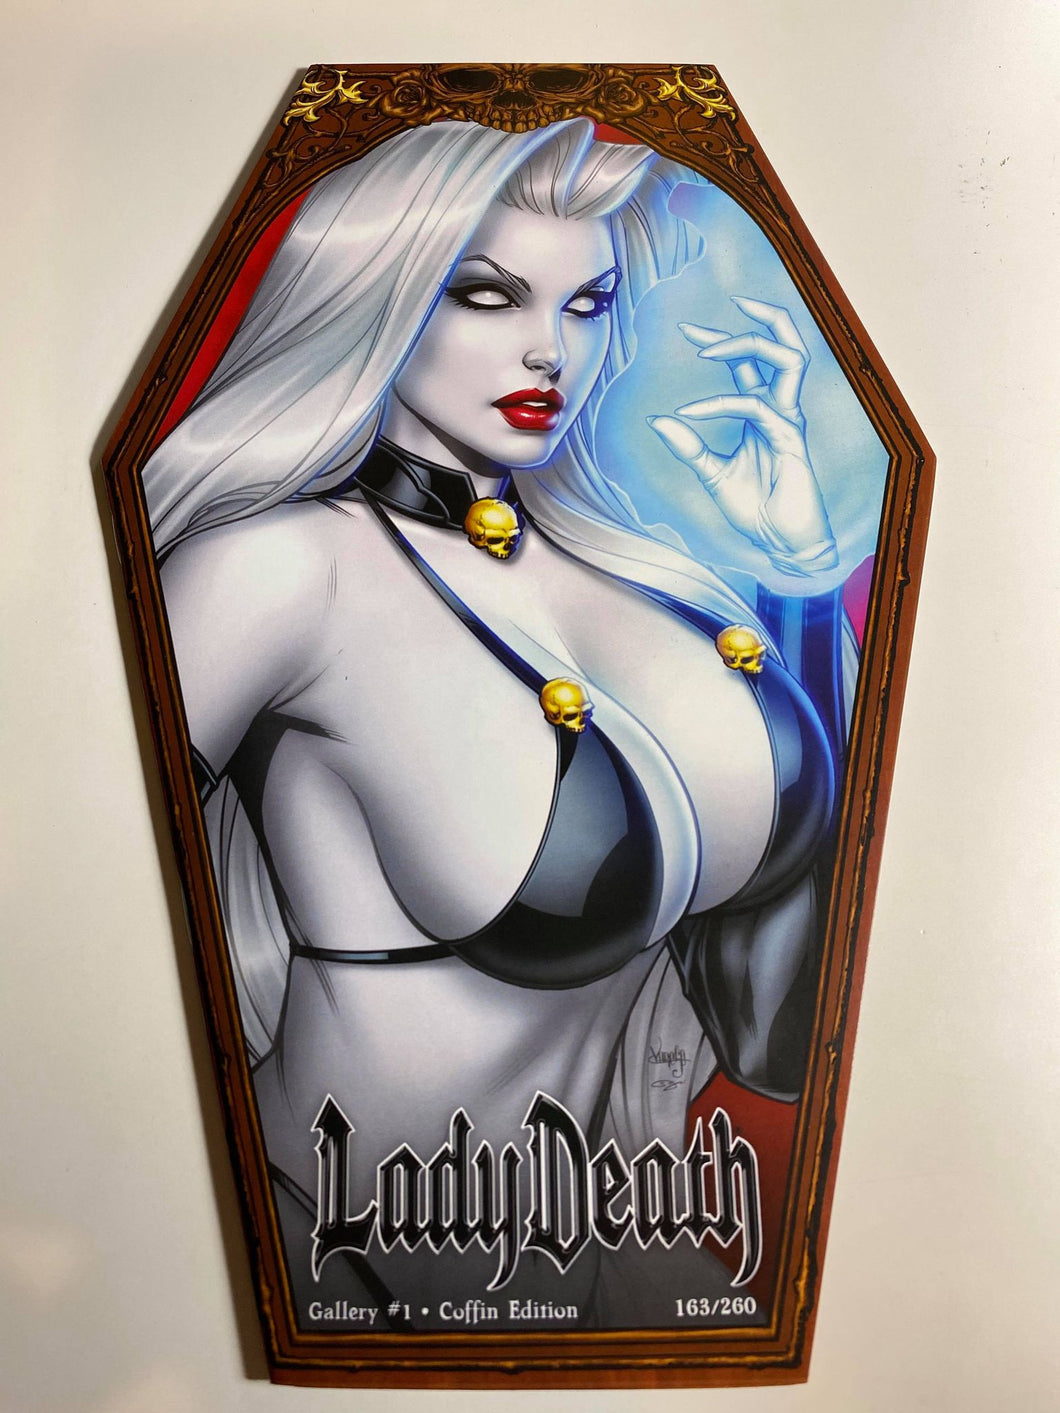 LADY DEATH GALLERY #1 COFFIN EDITION 163/260 DIE CUT VARIANT COMIC BOOK